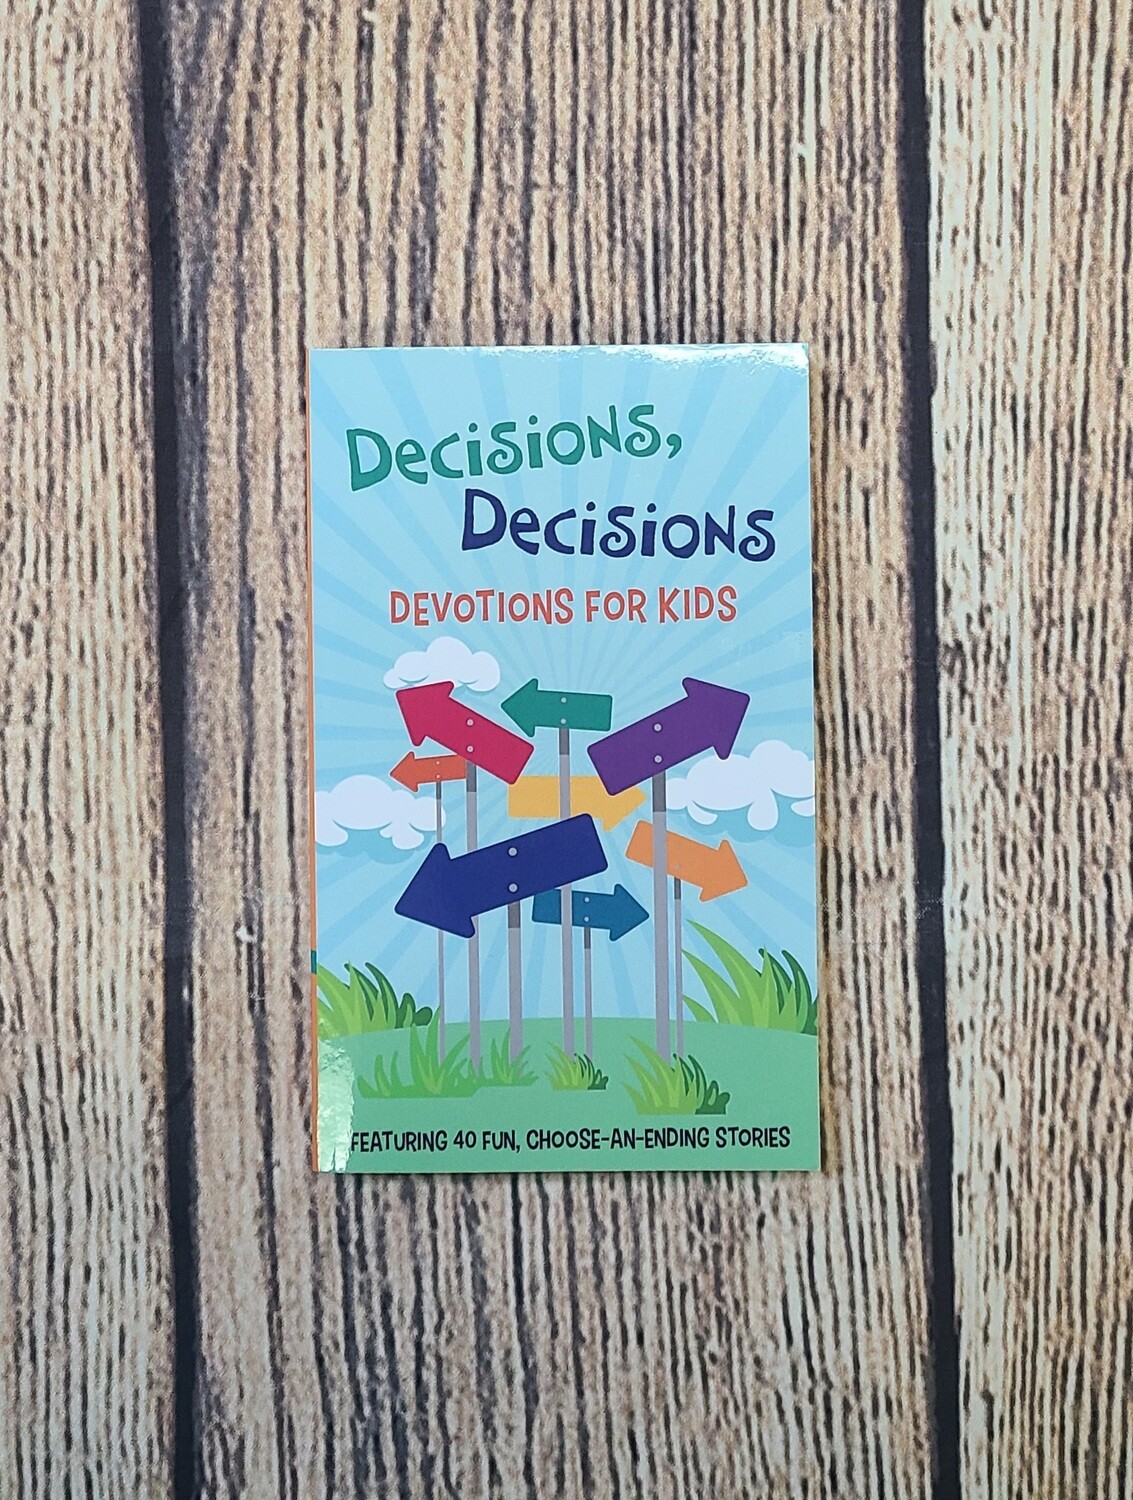 Decisions, Decisions Devotions for Kids by Trisha White Priebe